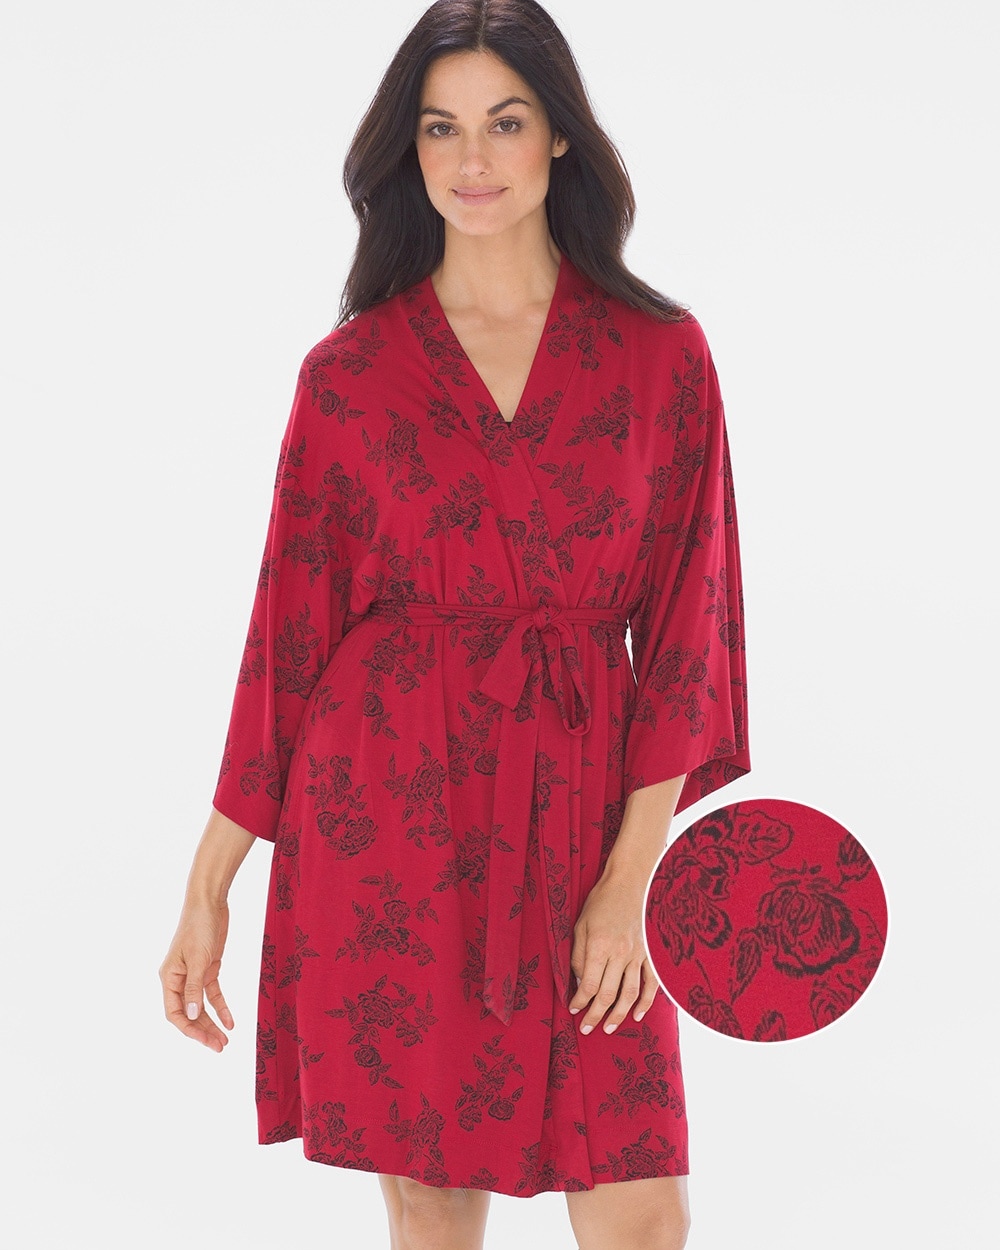 Cool Nights Kimono Sleeve Short Robe Lace Floral Red